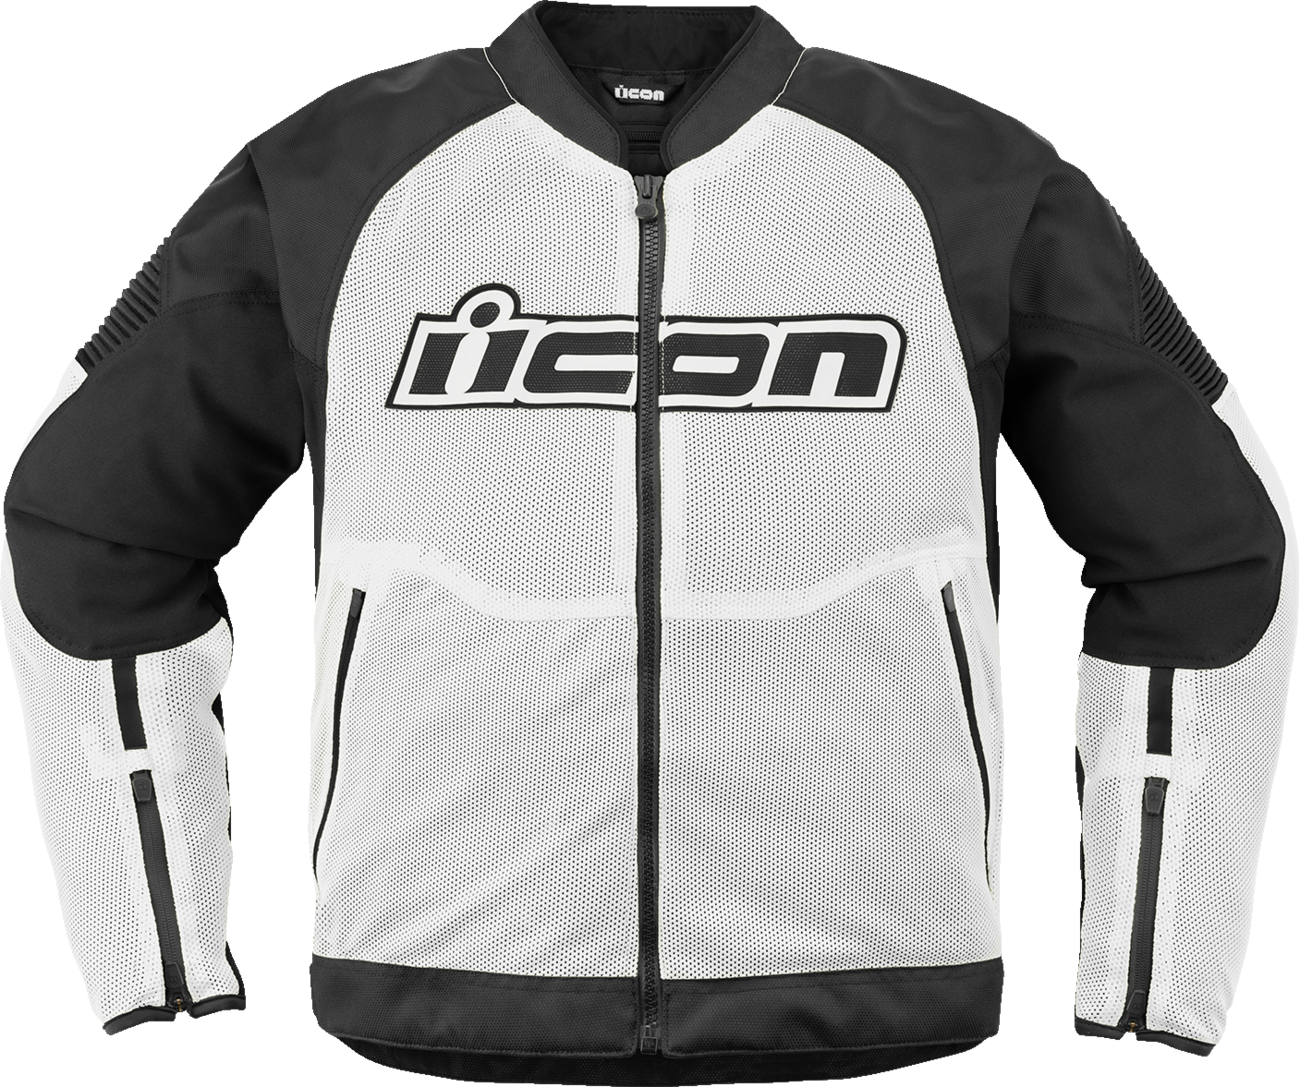 ICON Overlord3 Mesh™ CE Jacket - White - Small 2820-6736